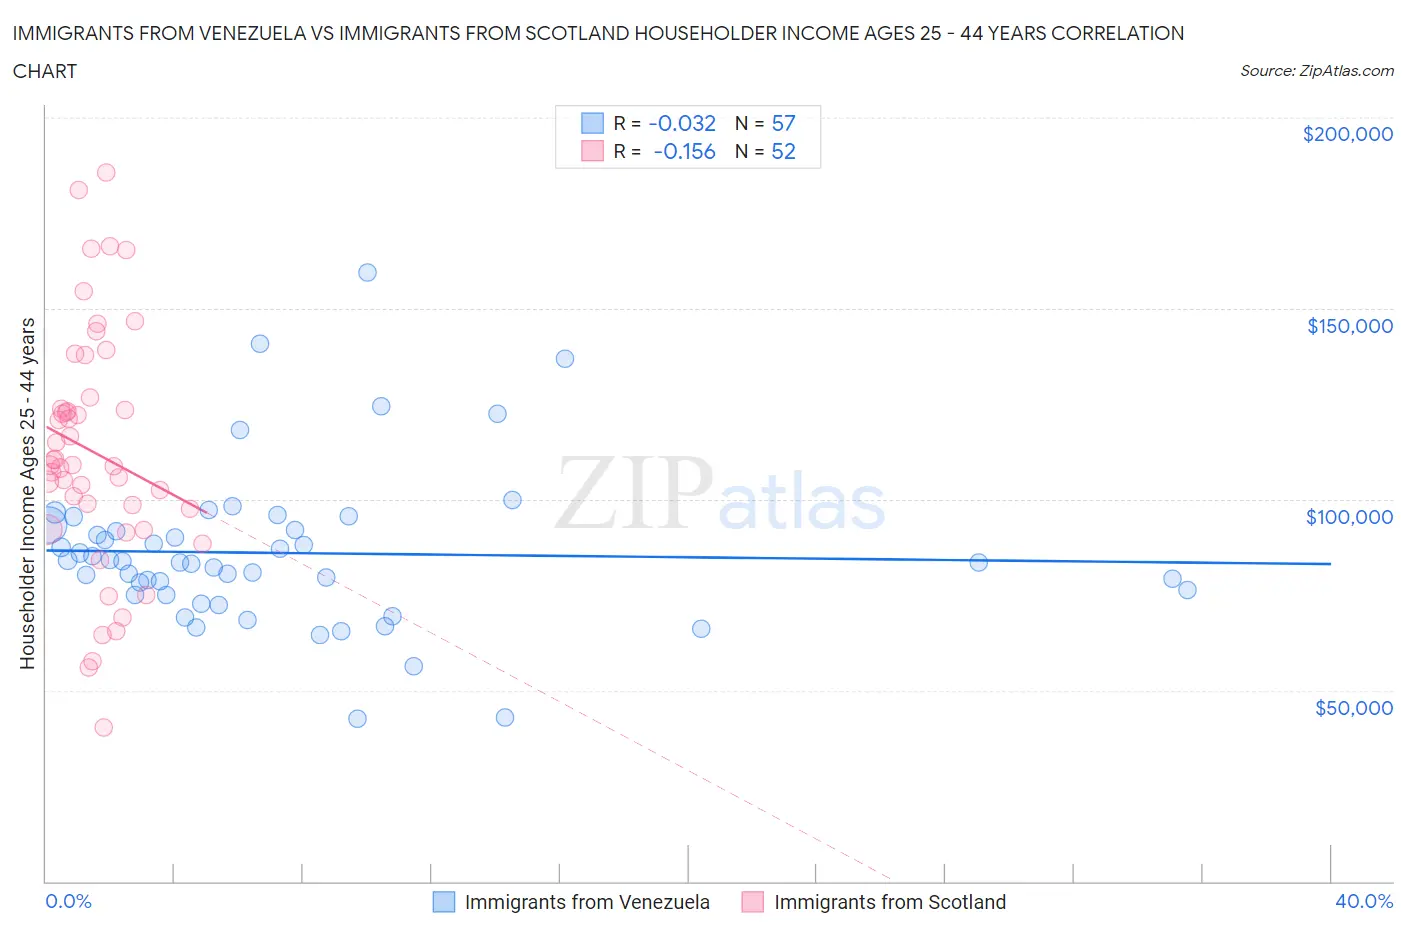 Immigrants from Venezuela vs Immigrants from Scotland Householder Income Ages 25 - 44 years